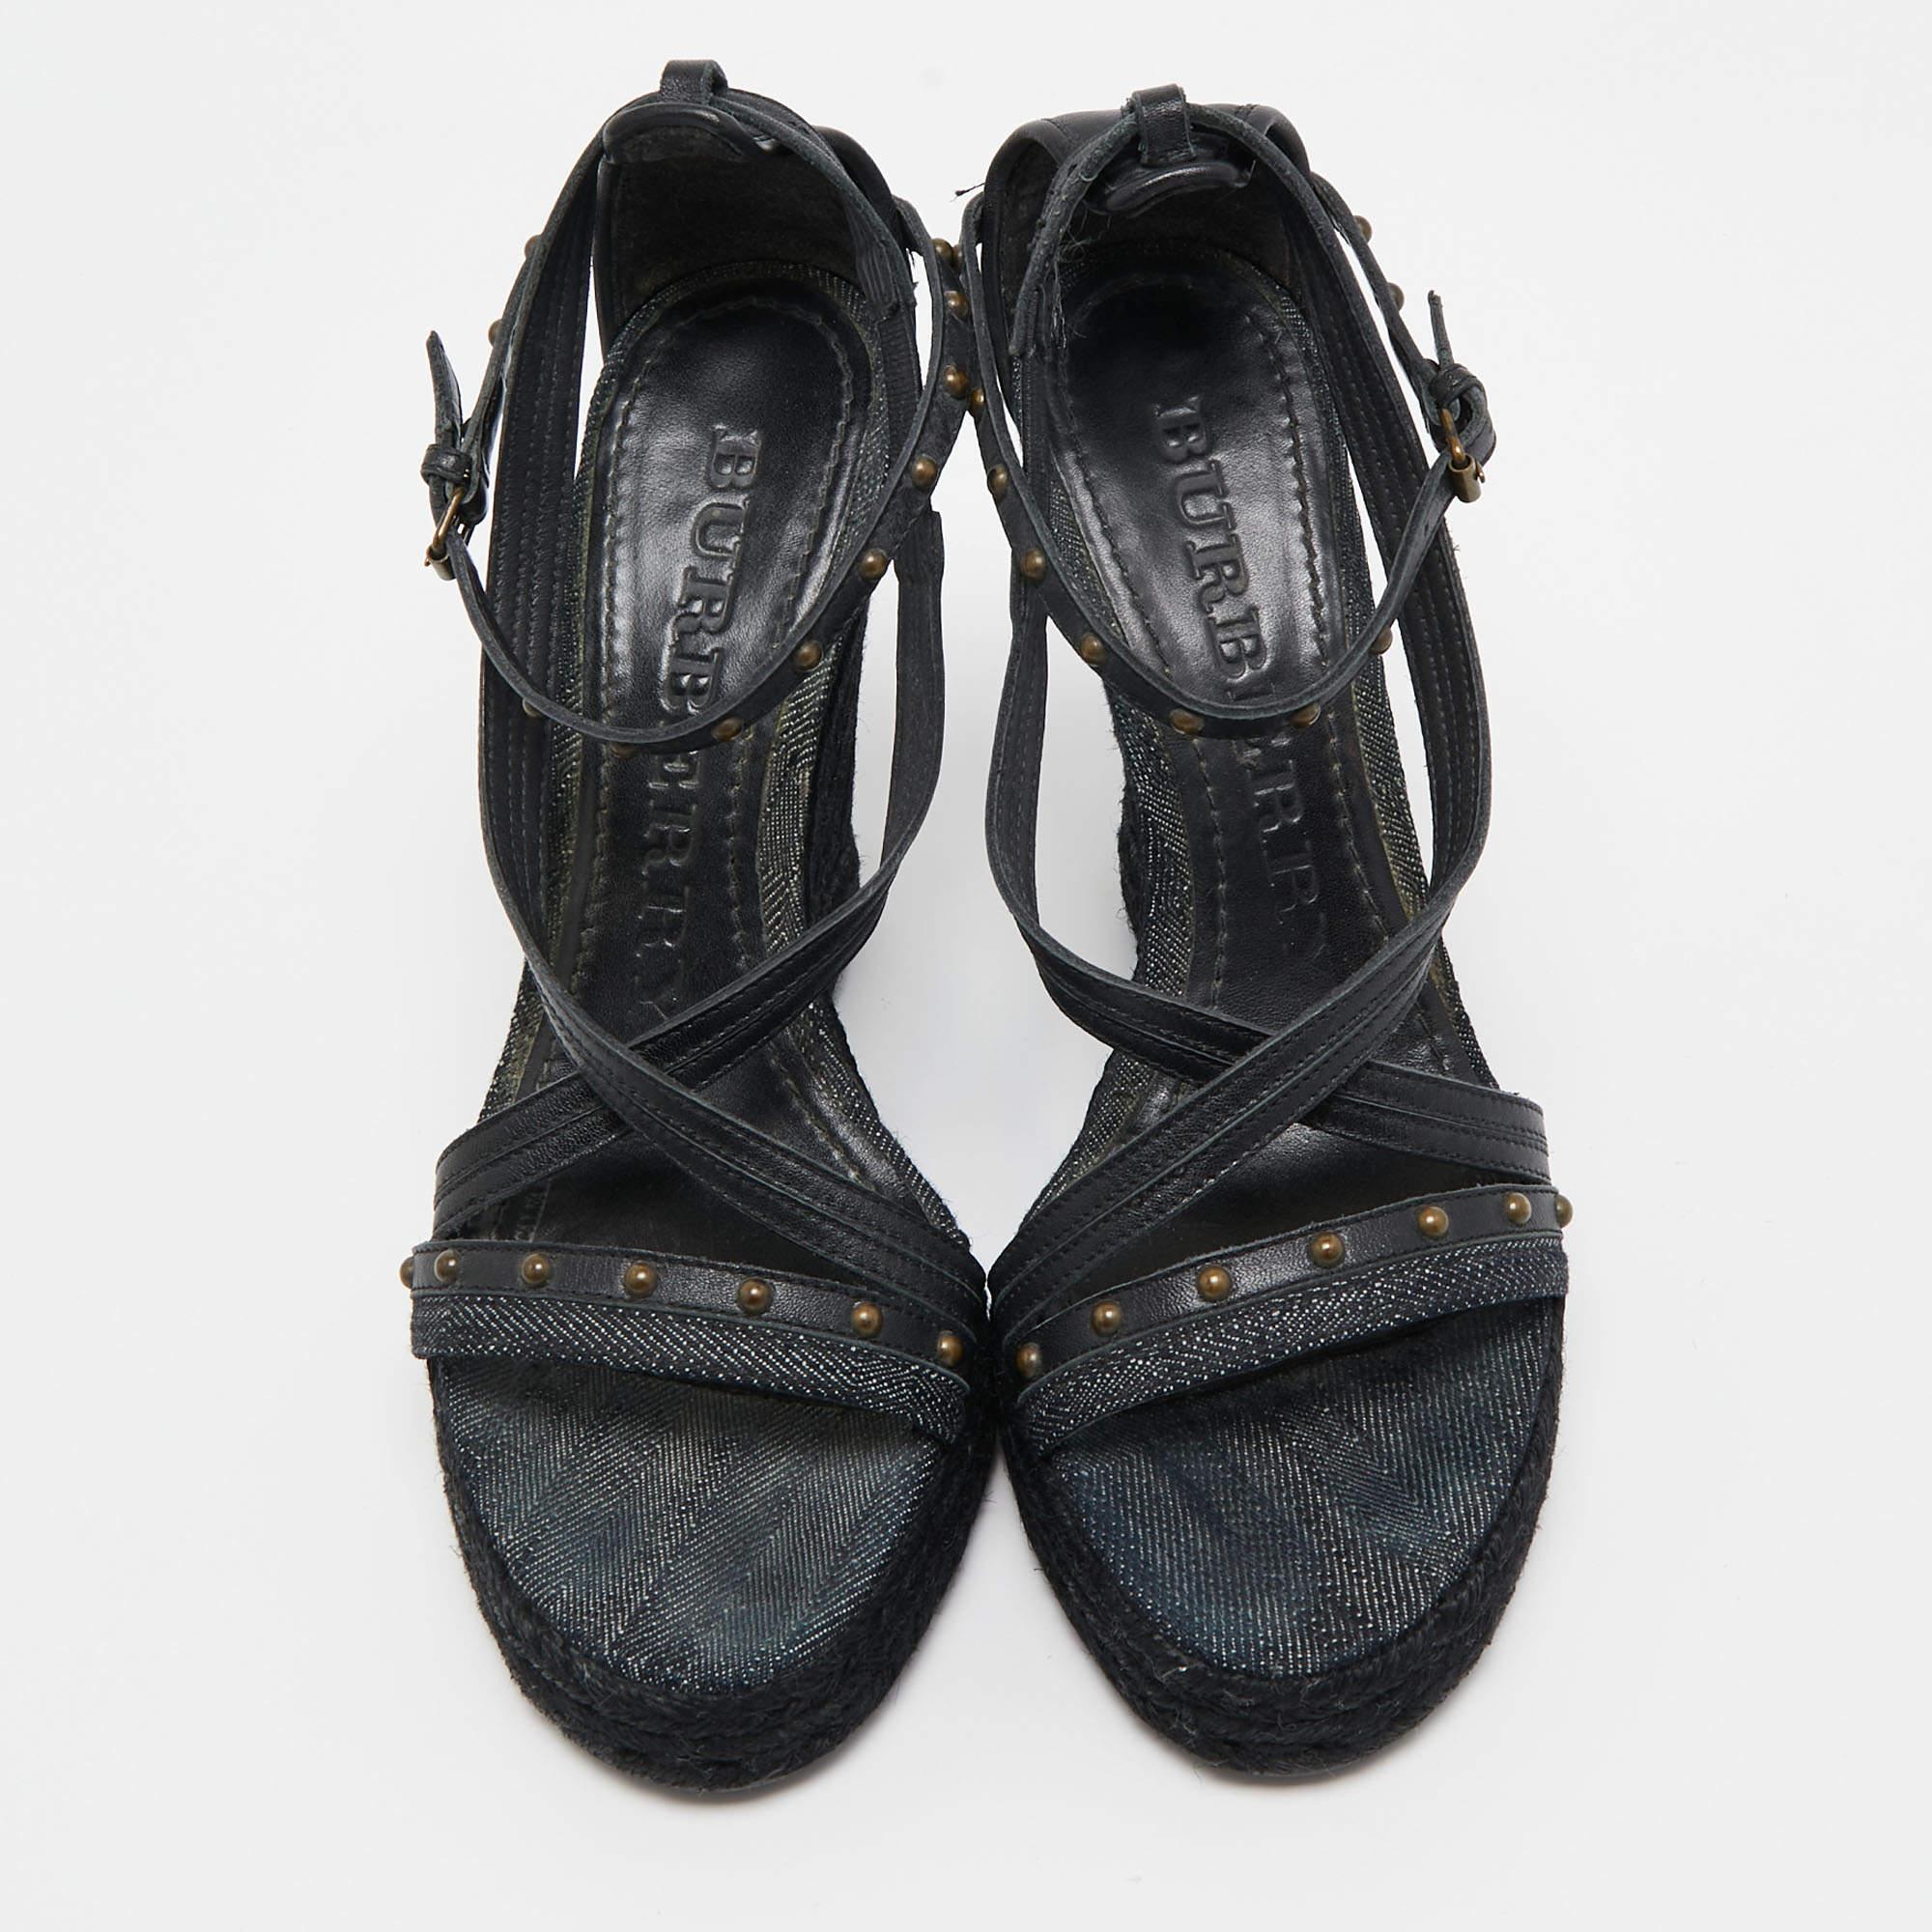 Burberry Black Leather and Denim Studded Platform Wedge Sandals Size 38.5 In Good Condition For Sale In Dubai, Al Qouz 2